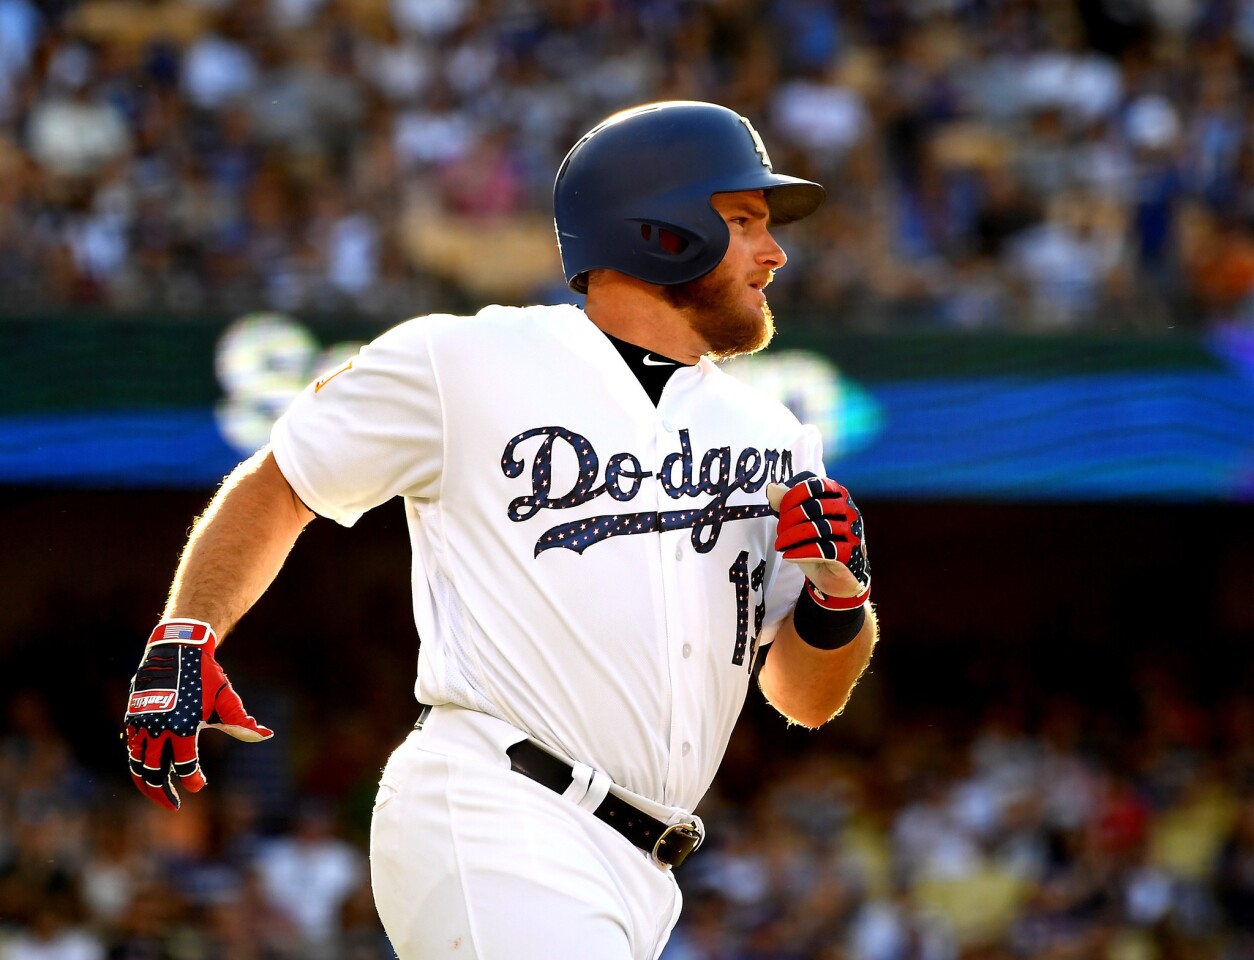 LOS ANGELES, CA - JULY 04: Max Muncy #13 of the Los Angeles Dodgers runs to first base on a single in the third inning of the game against the Pittsburgh Pirates at Dodger Stadium on July 4, 2018 in Los Angeles, California. (Photo by Jayne Kamin-Oncea/Getty Images) ** OUTS - ELSENT, FPG, CM - OUTS * NM, PH, VA if sourced by CT, LA or MoD **